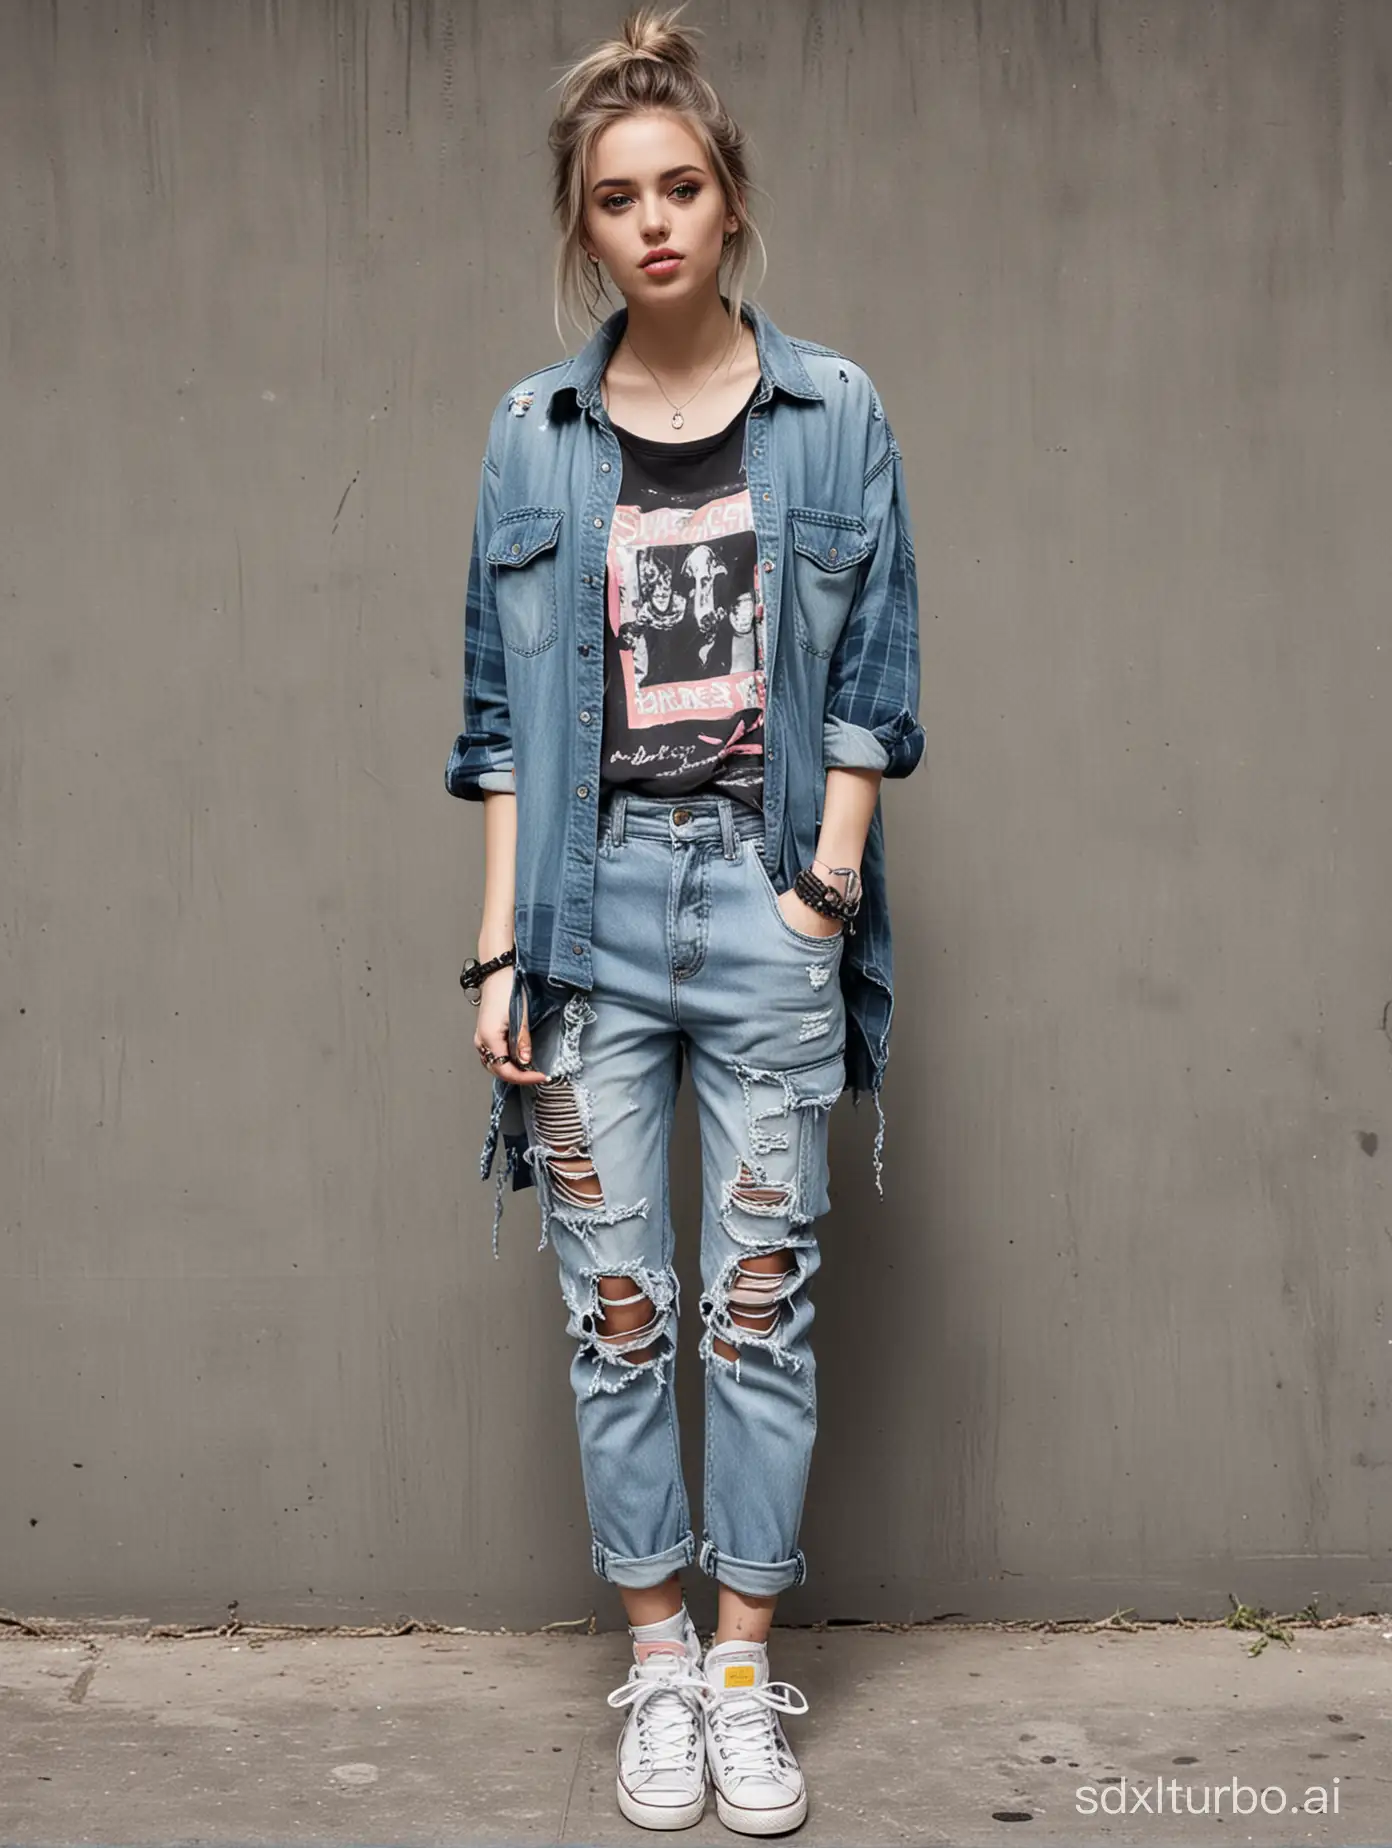 Grunge-Fashion-Portrait-Stylish-Girl-in-Distressed-Jeans-and-Neon-Accents